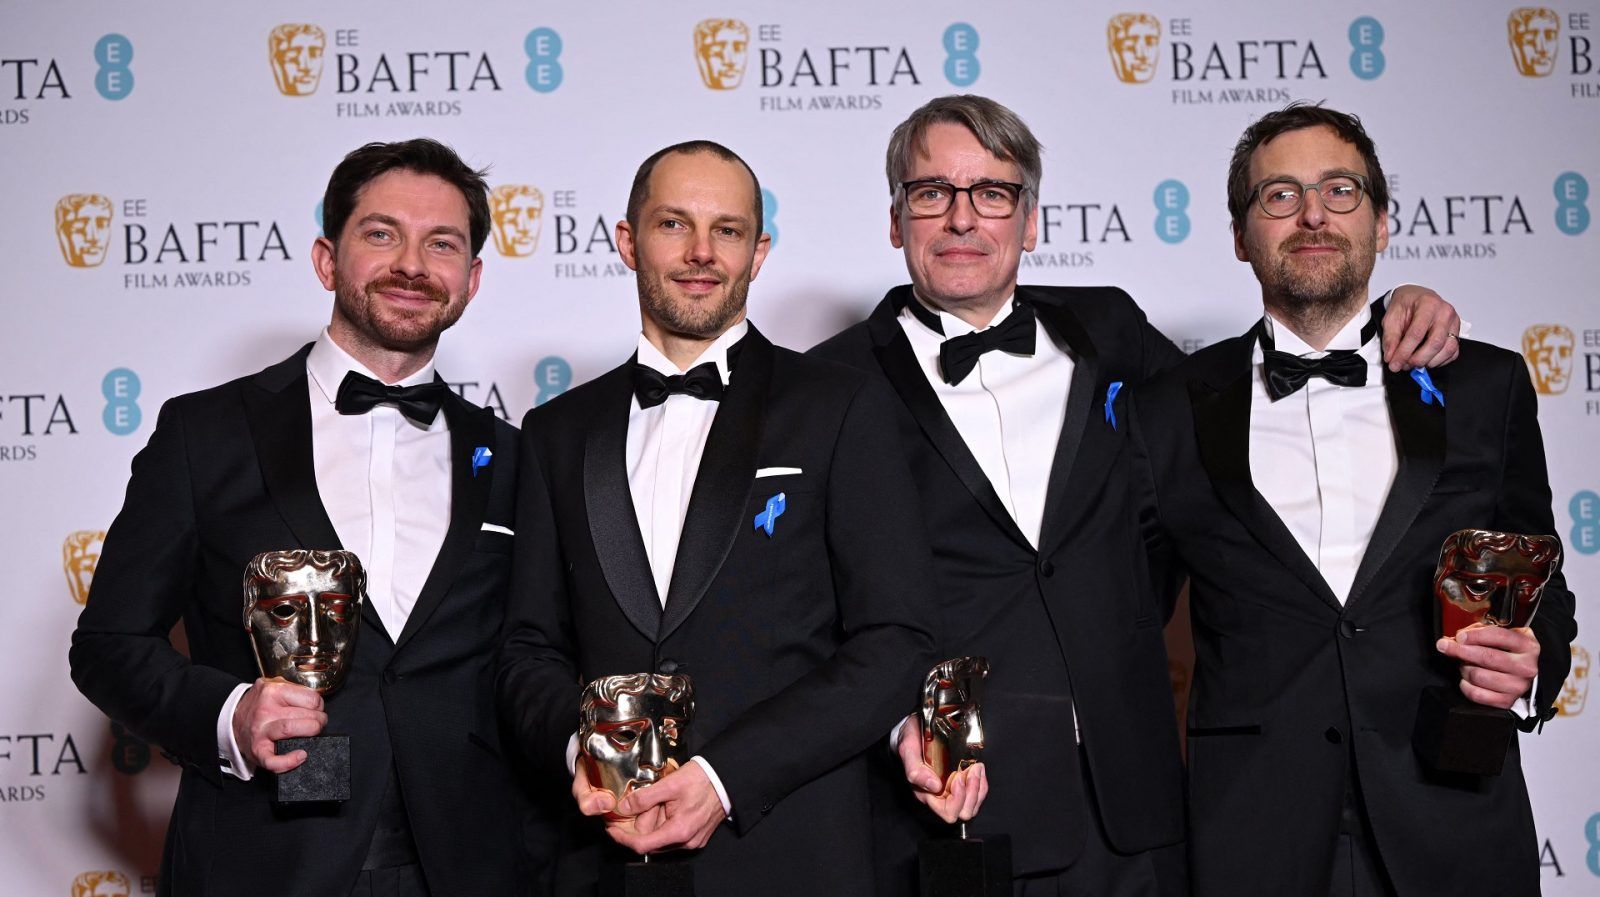 BAFTA Awards 2023 All the winners and highlights